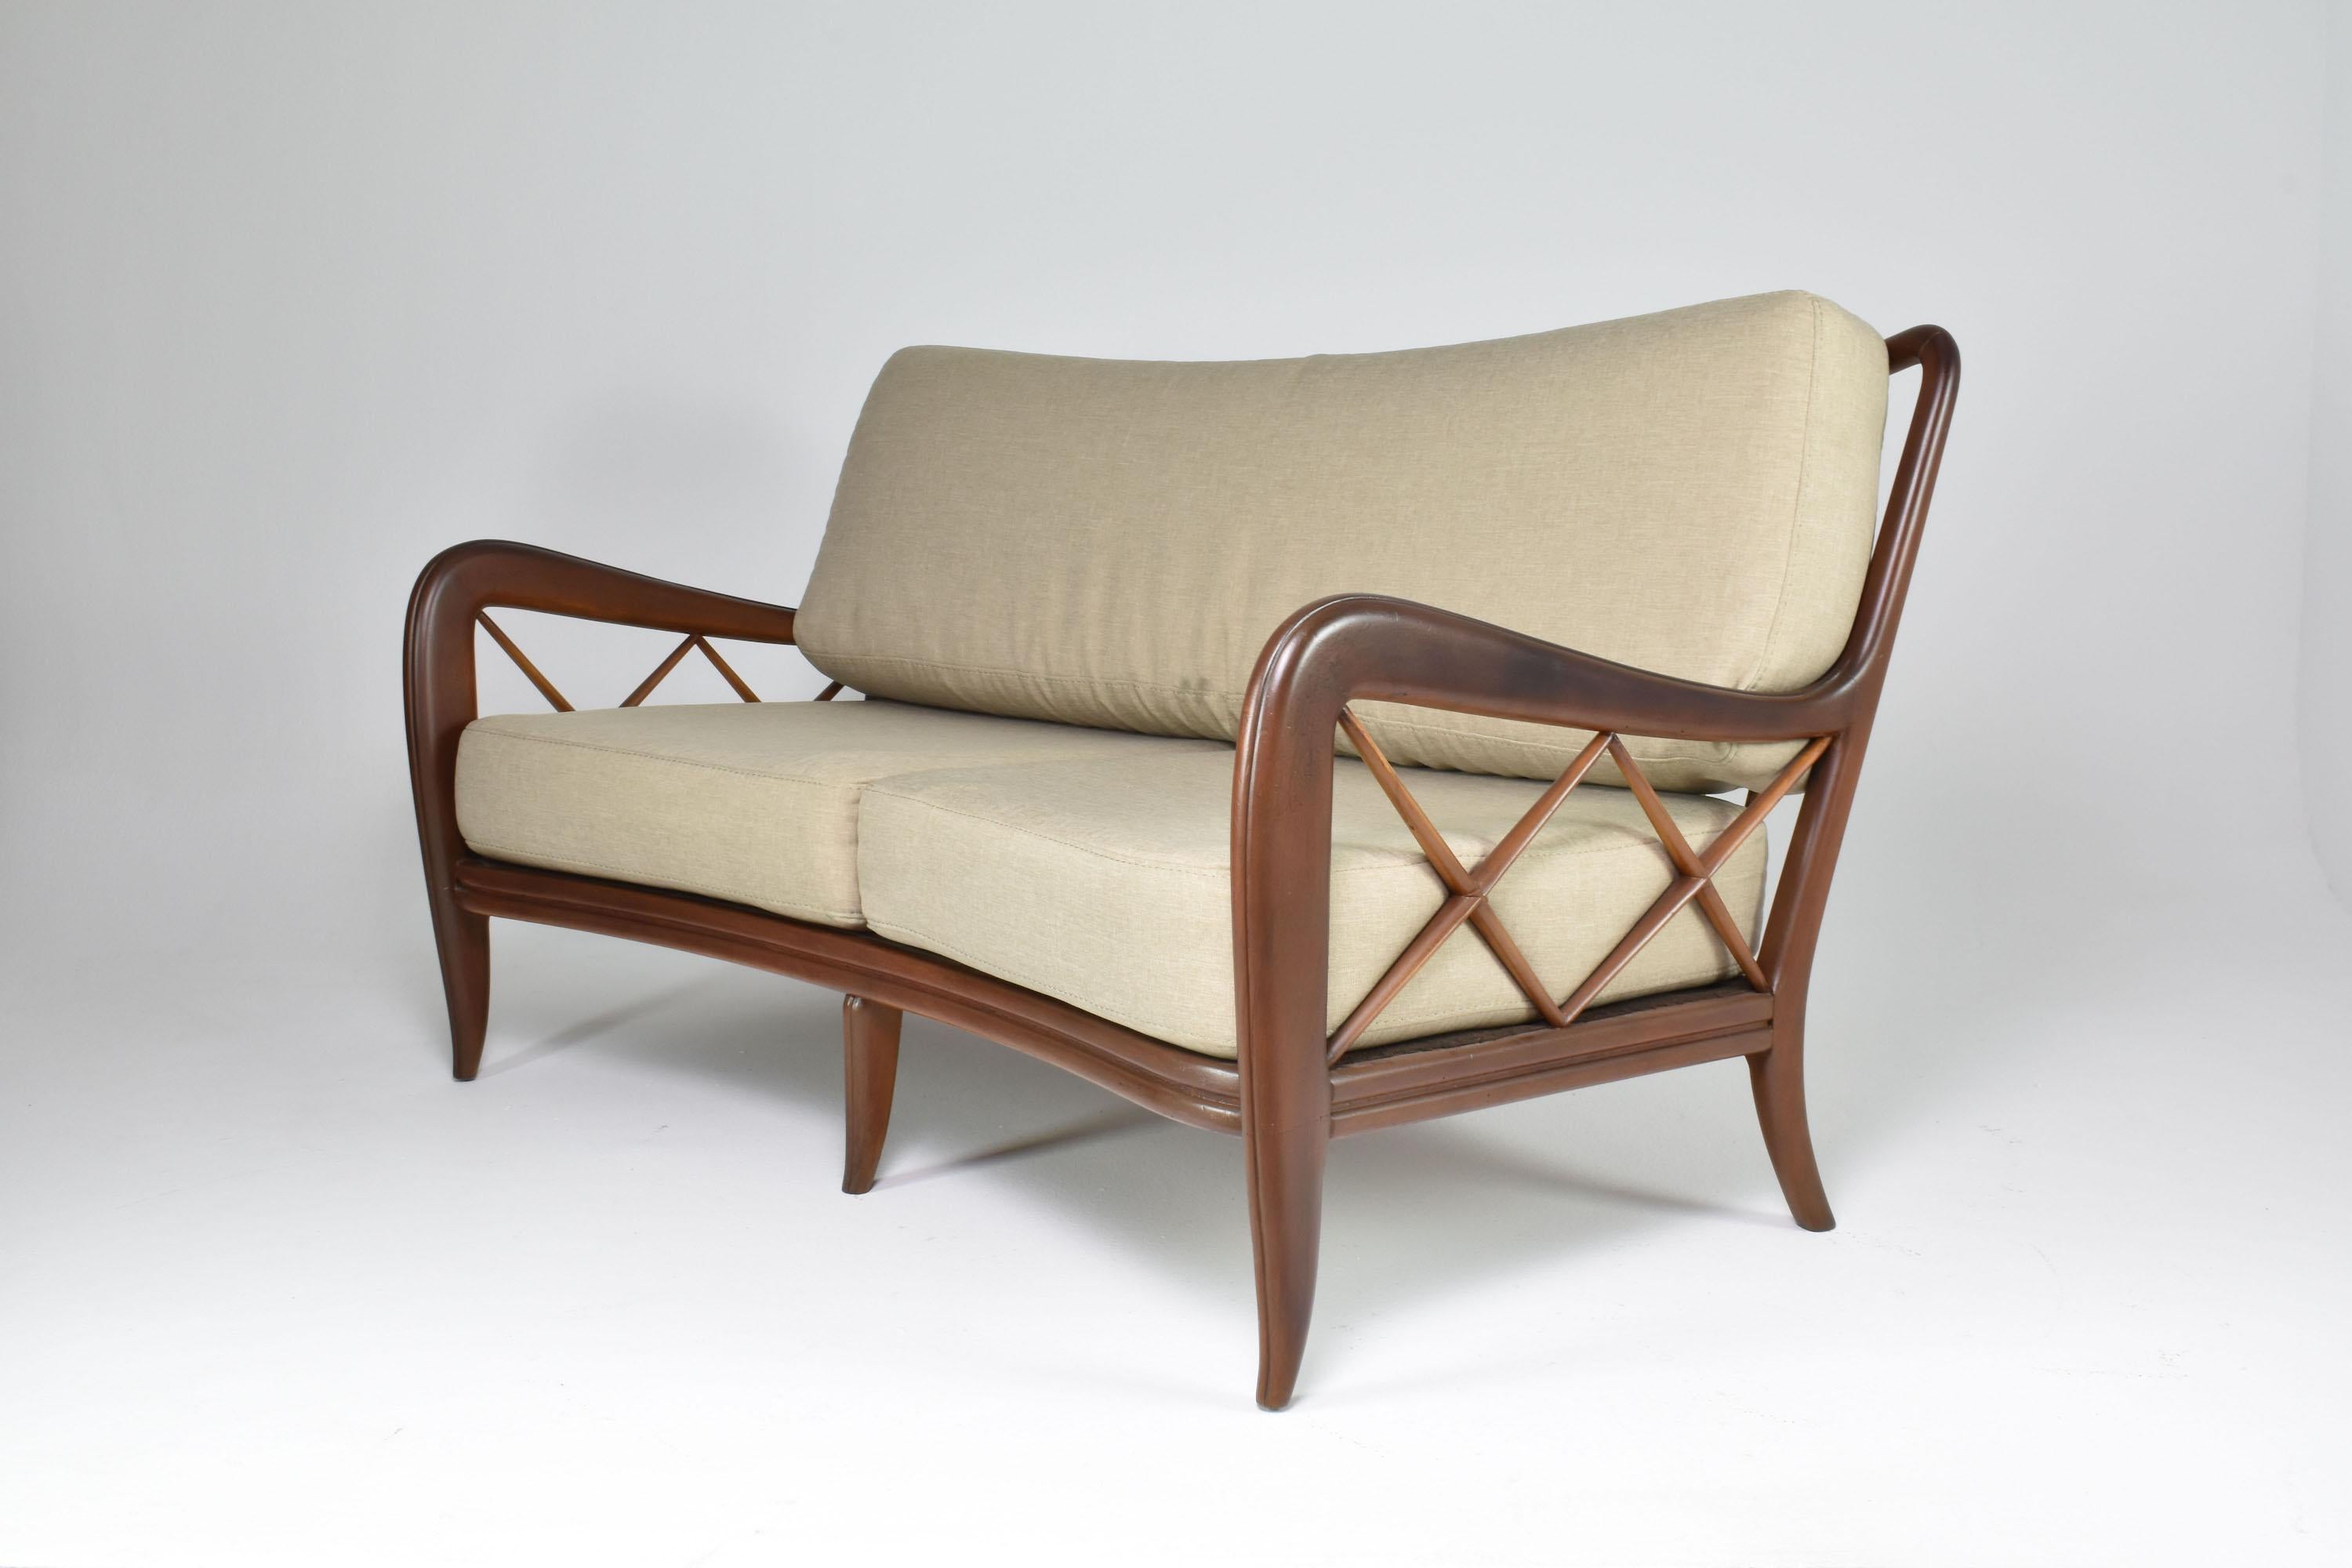 A beautiful 1950s Italian cream two-seater sofa attributed to Paolo Buffa with a structure crafted of bent walnut that adds to its durability and strength. One of the standout features of this collectable vintage sofa is the crossed wooden panels on